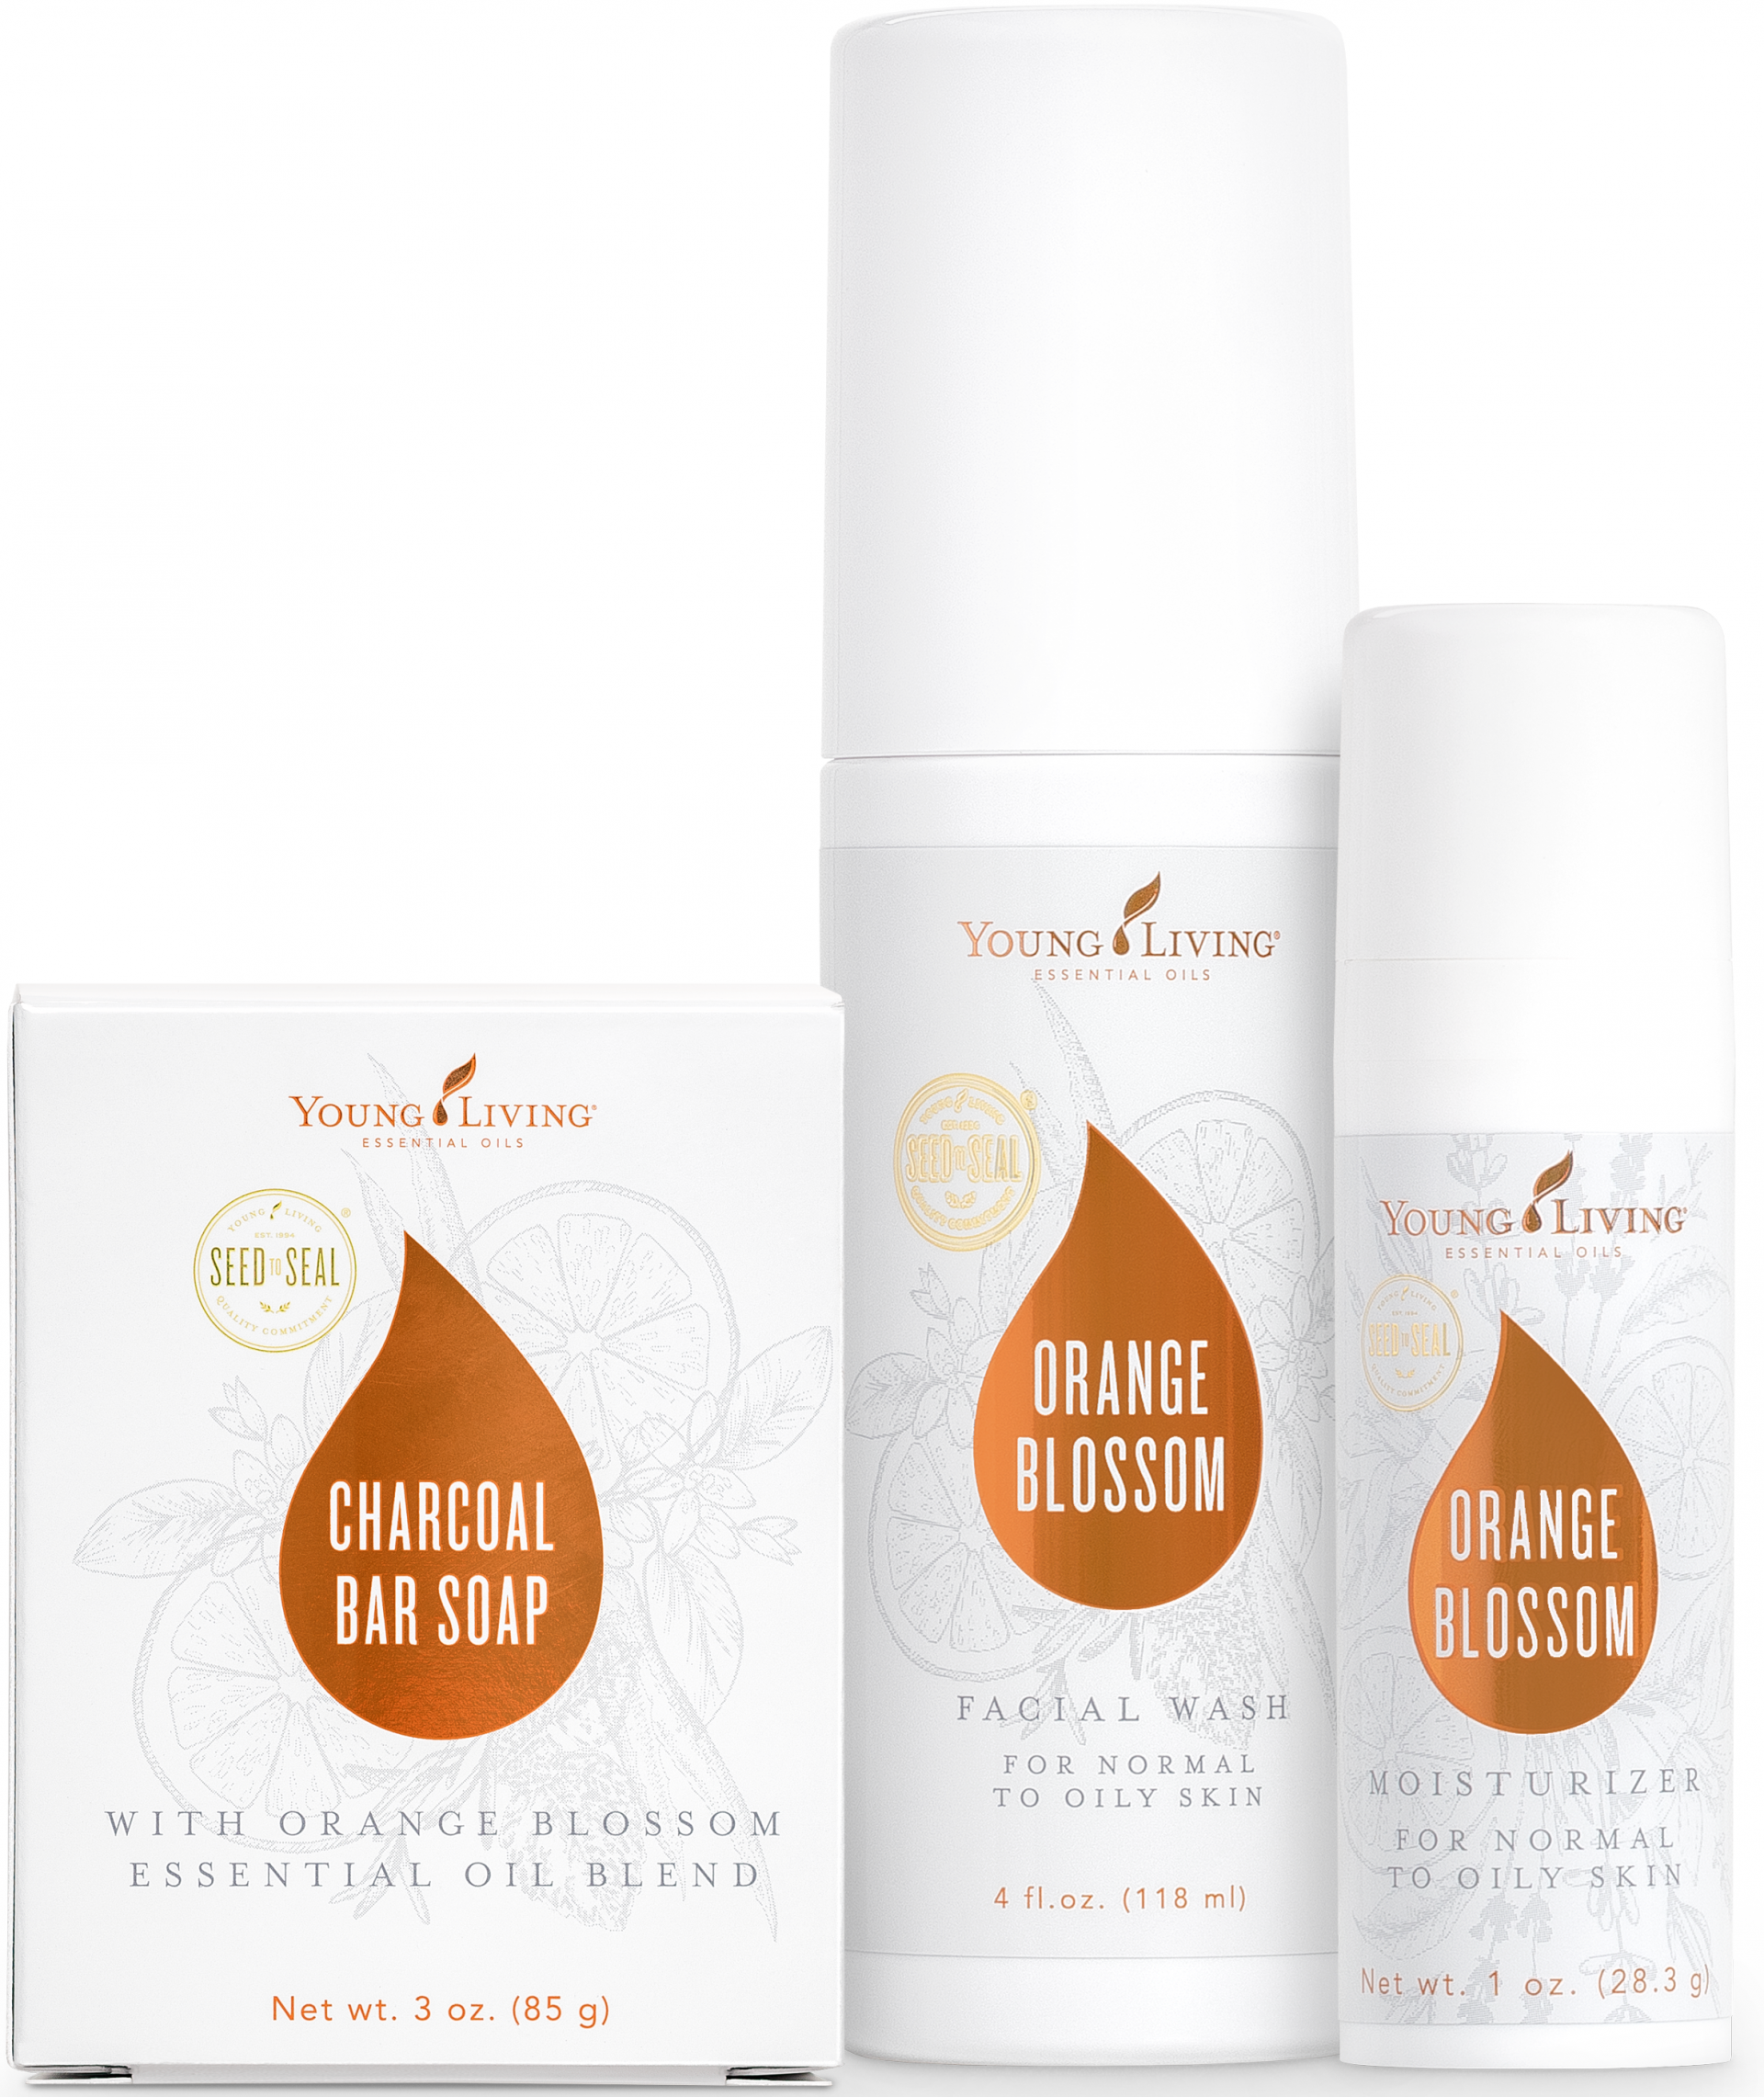 Orange Blossom acne face wash and moisturizer and charcoal soap